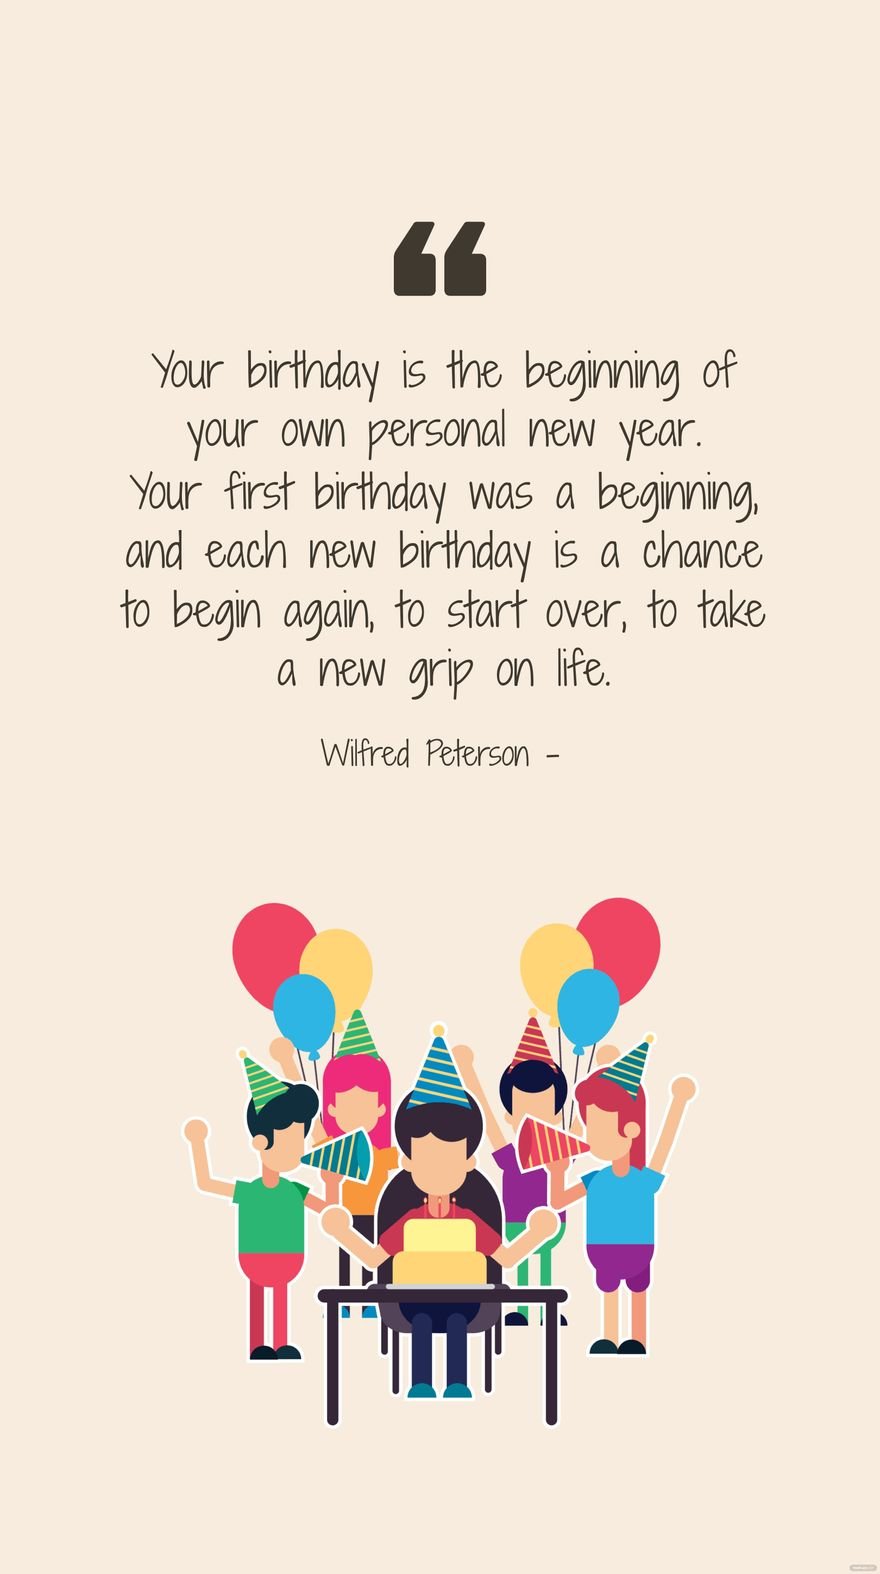 Wilfred Peterson - Your birthday is the beginning of your own personal new year. Your first birthday was a beginning, and each new birthday is a chance to begin again, to start over, to take a new gri